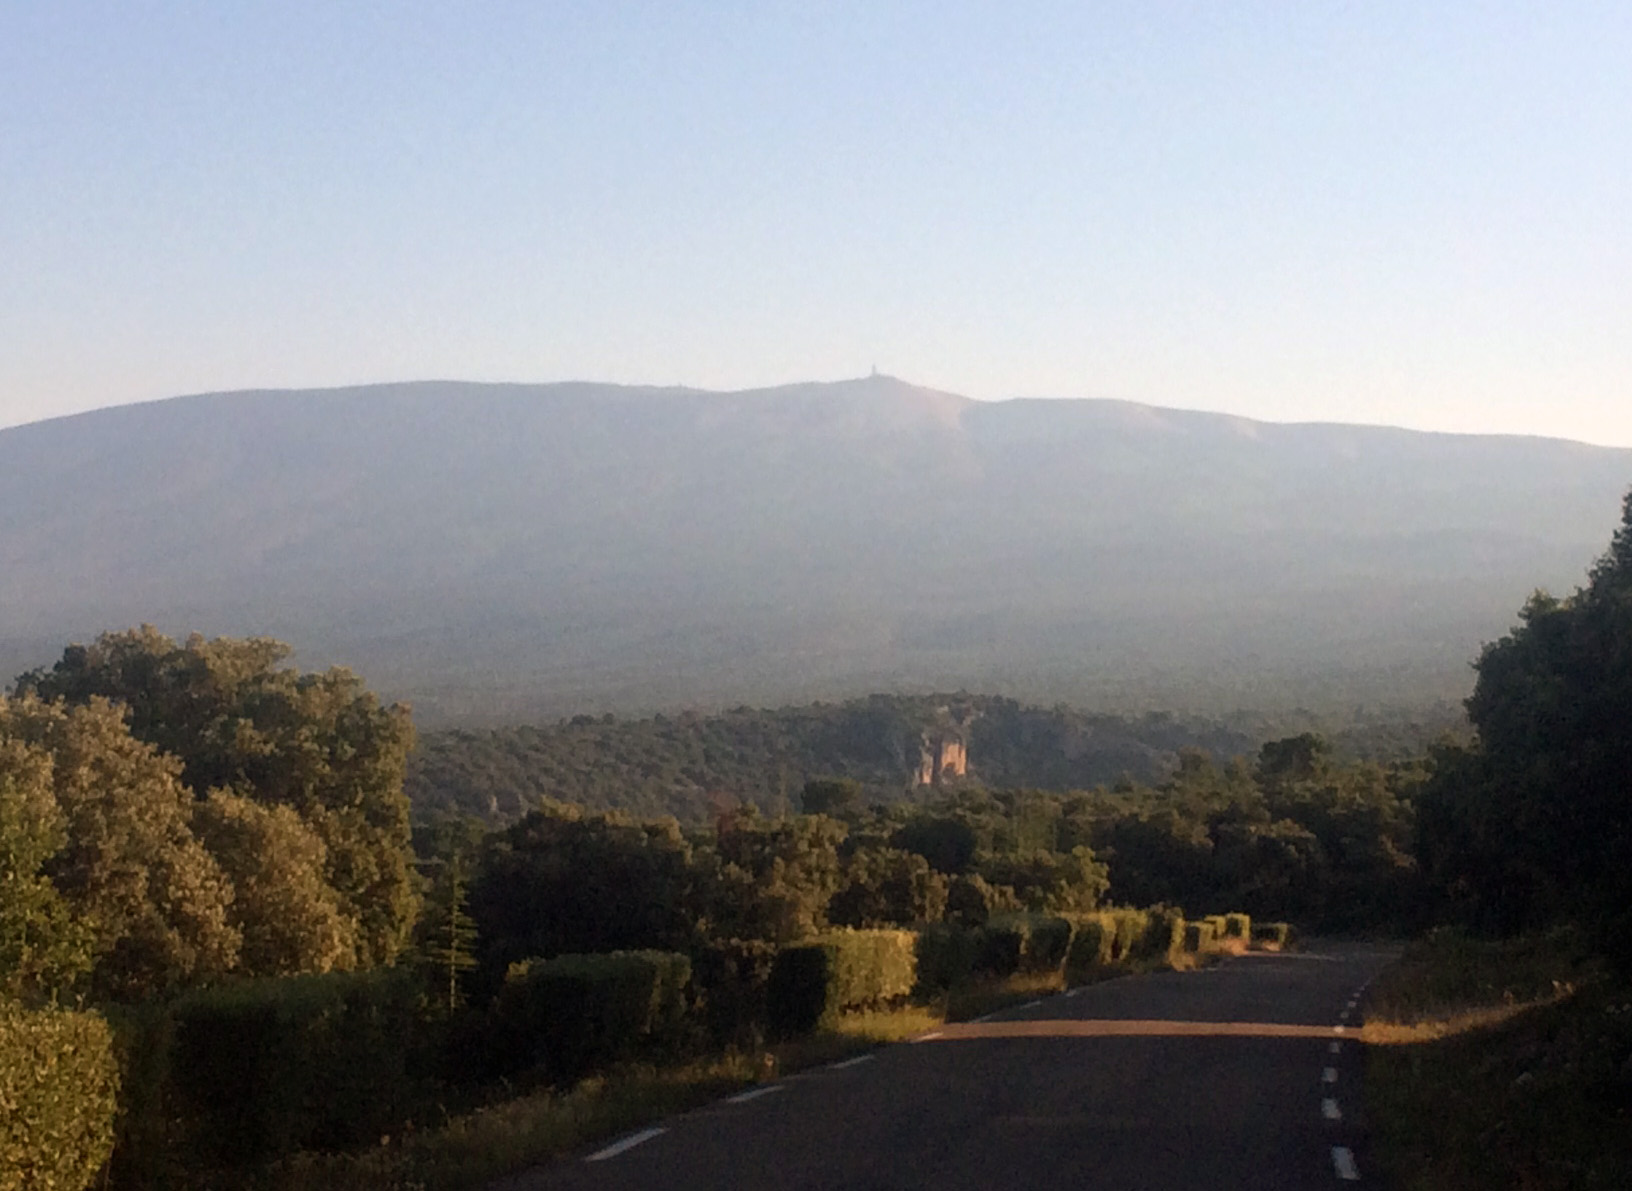 Mont Ventoux - the mountain we are NOT climbing!